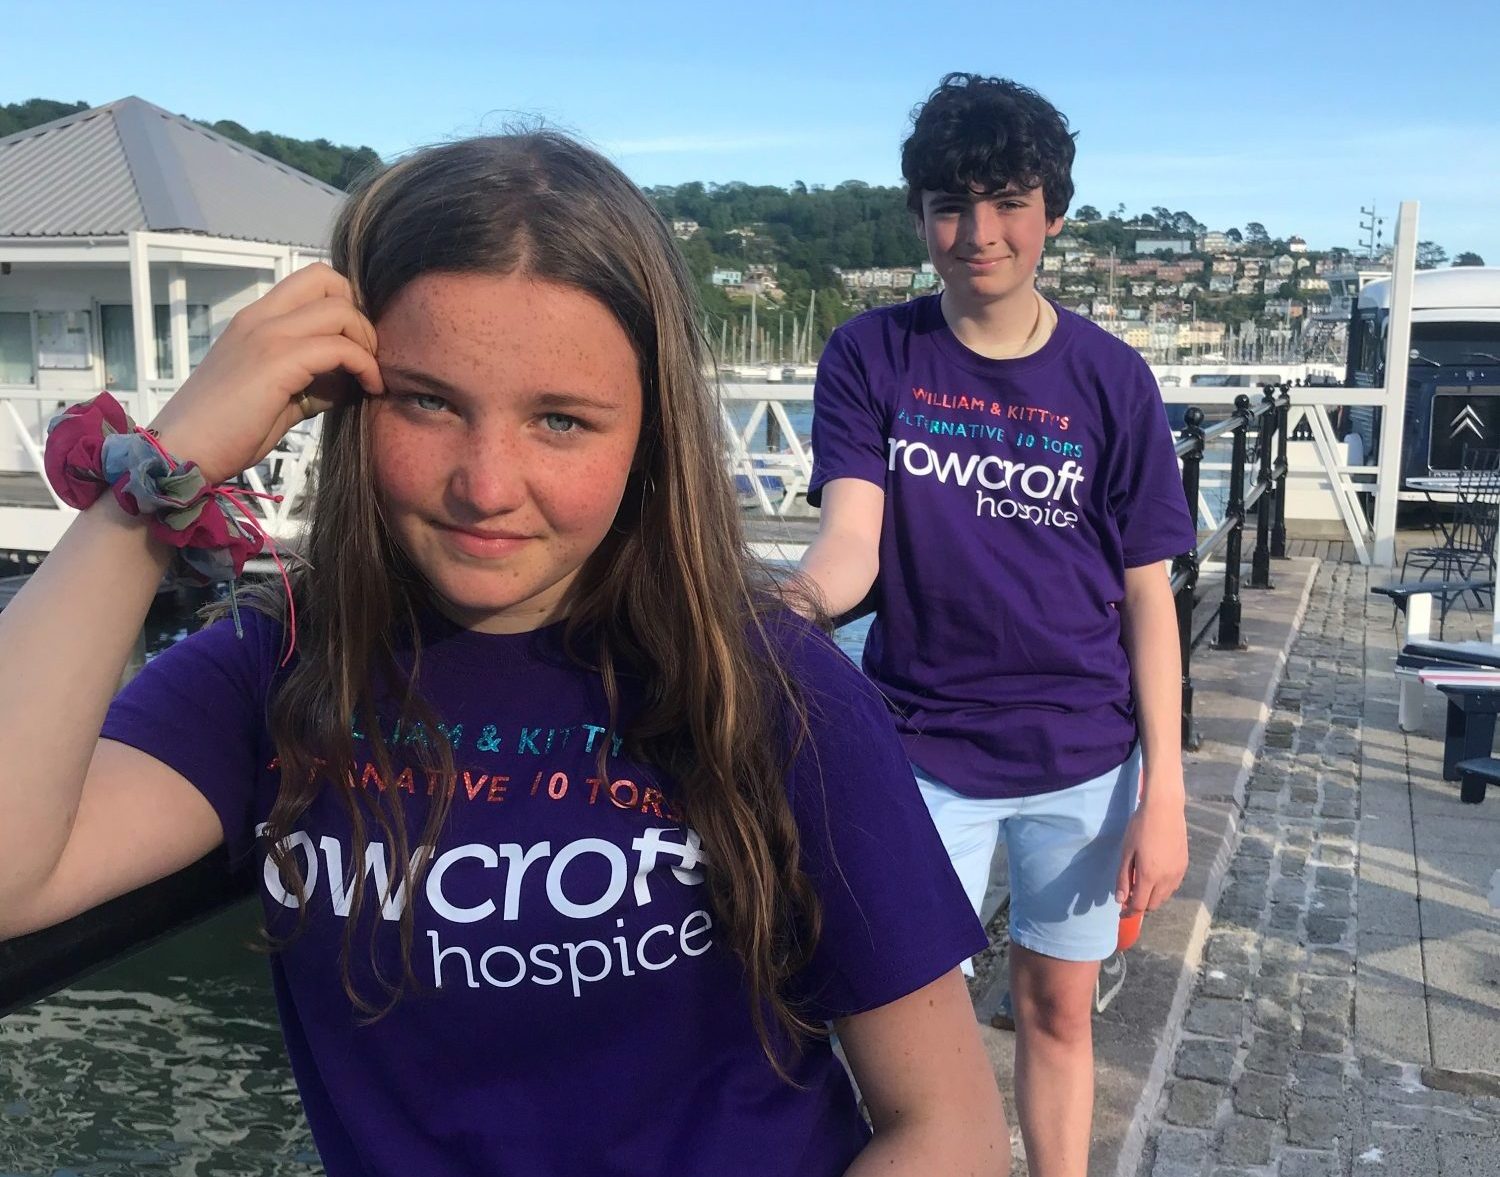 Two Rowcroft fundraises pose in their purple Rowcroft t-shirts.